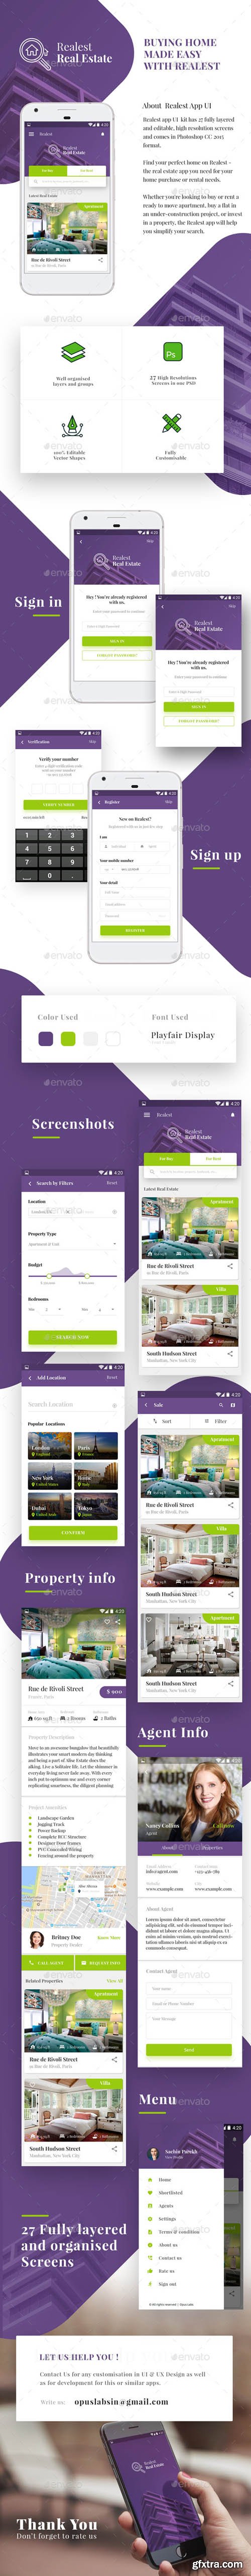 GR - Real Estate App Android & iOS UI | Realest 20910009